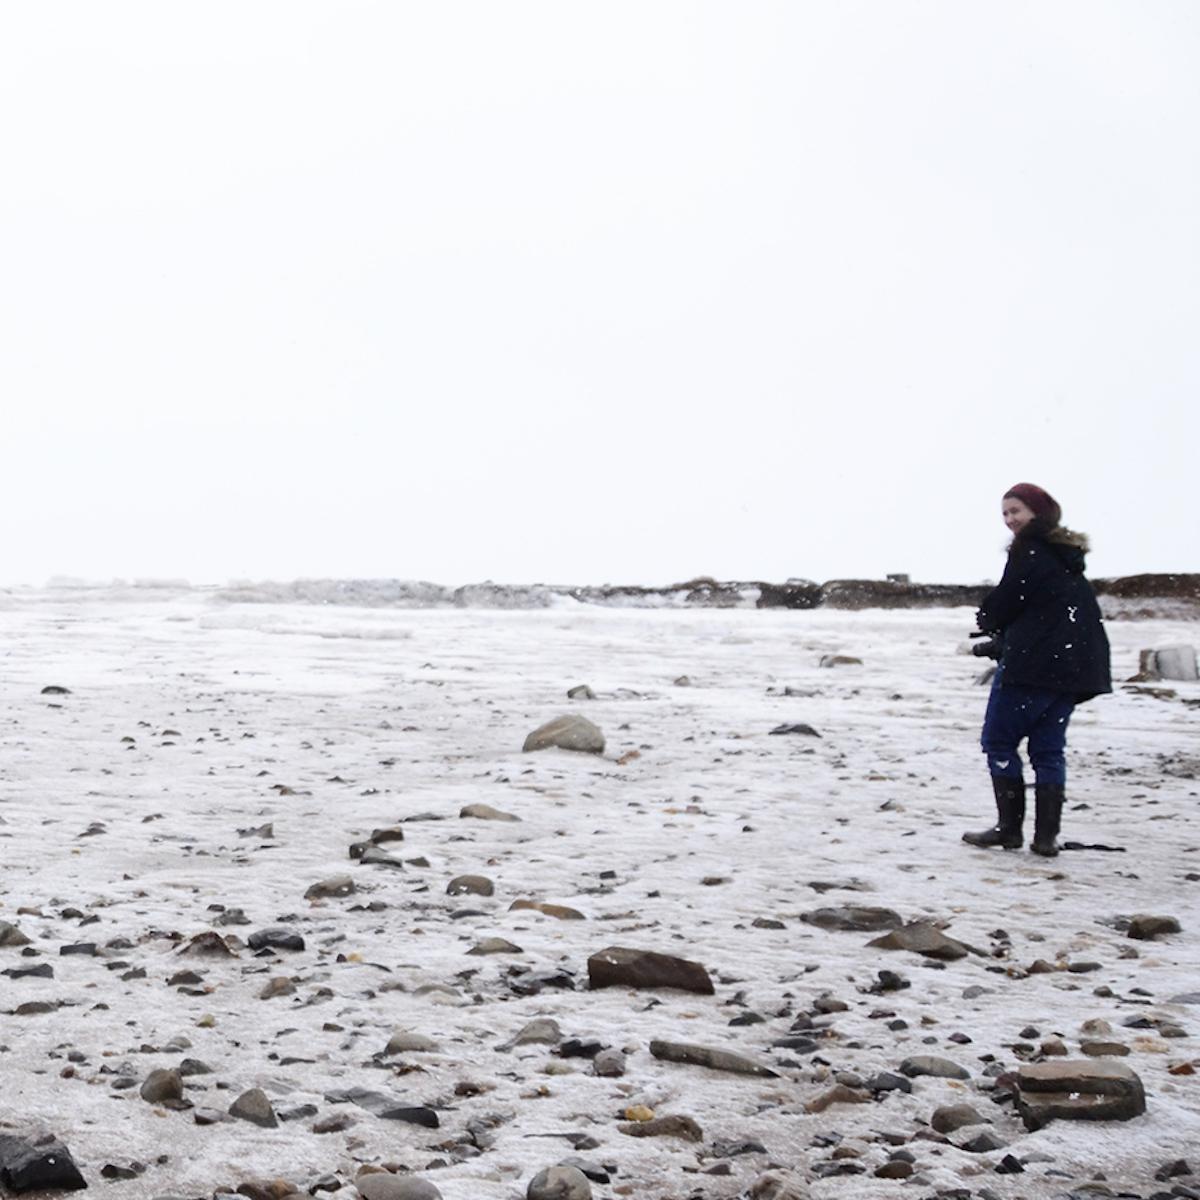  person standing in the snow. They're by the ocean, and the ground is rocky. The person is on the right side of the image, looking back towards the camera. They have olive skin and dark brown hair, and wear a red beanie, black jacket and boots, and blue jeans.